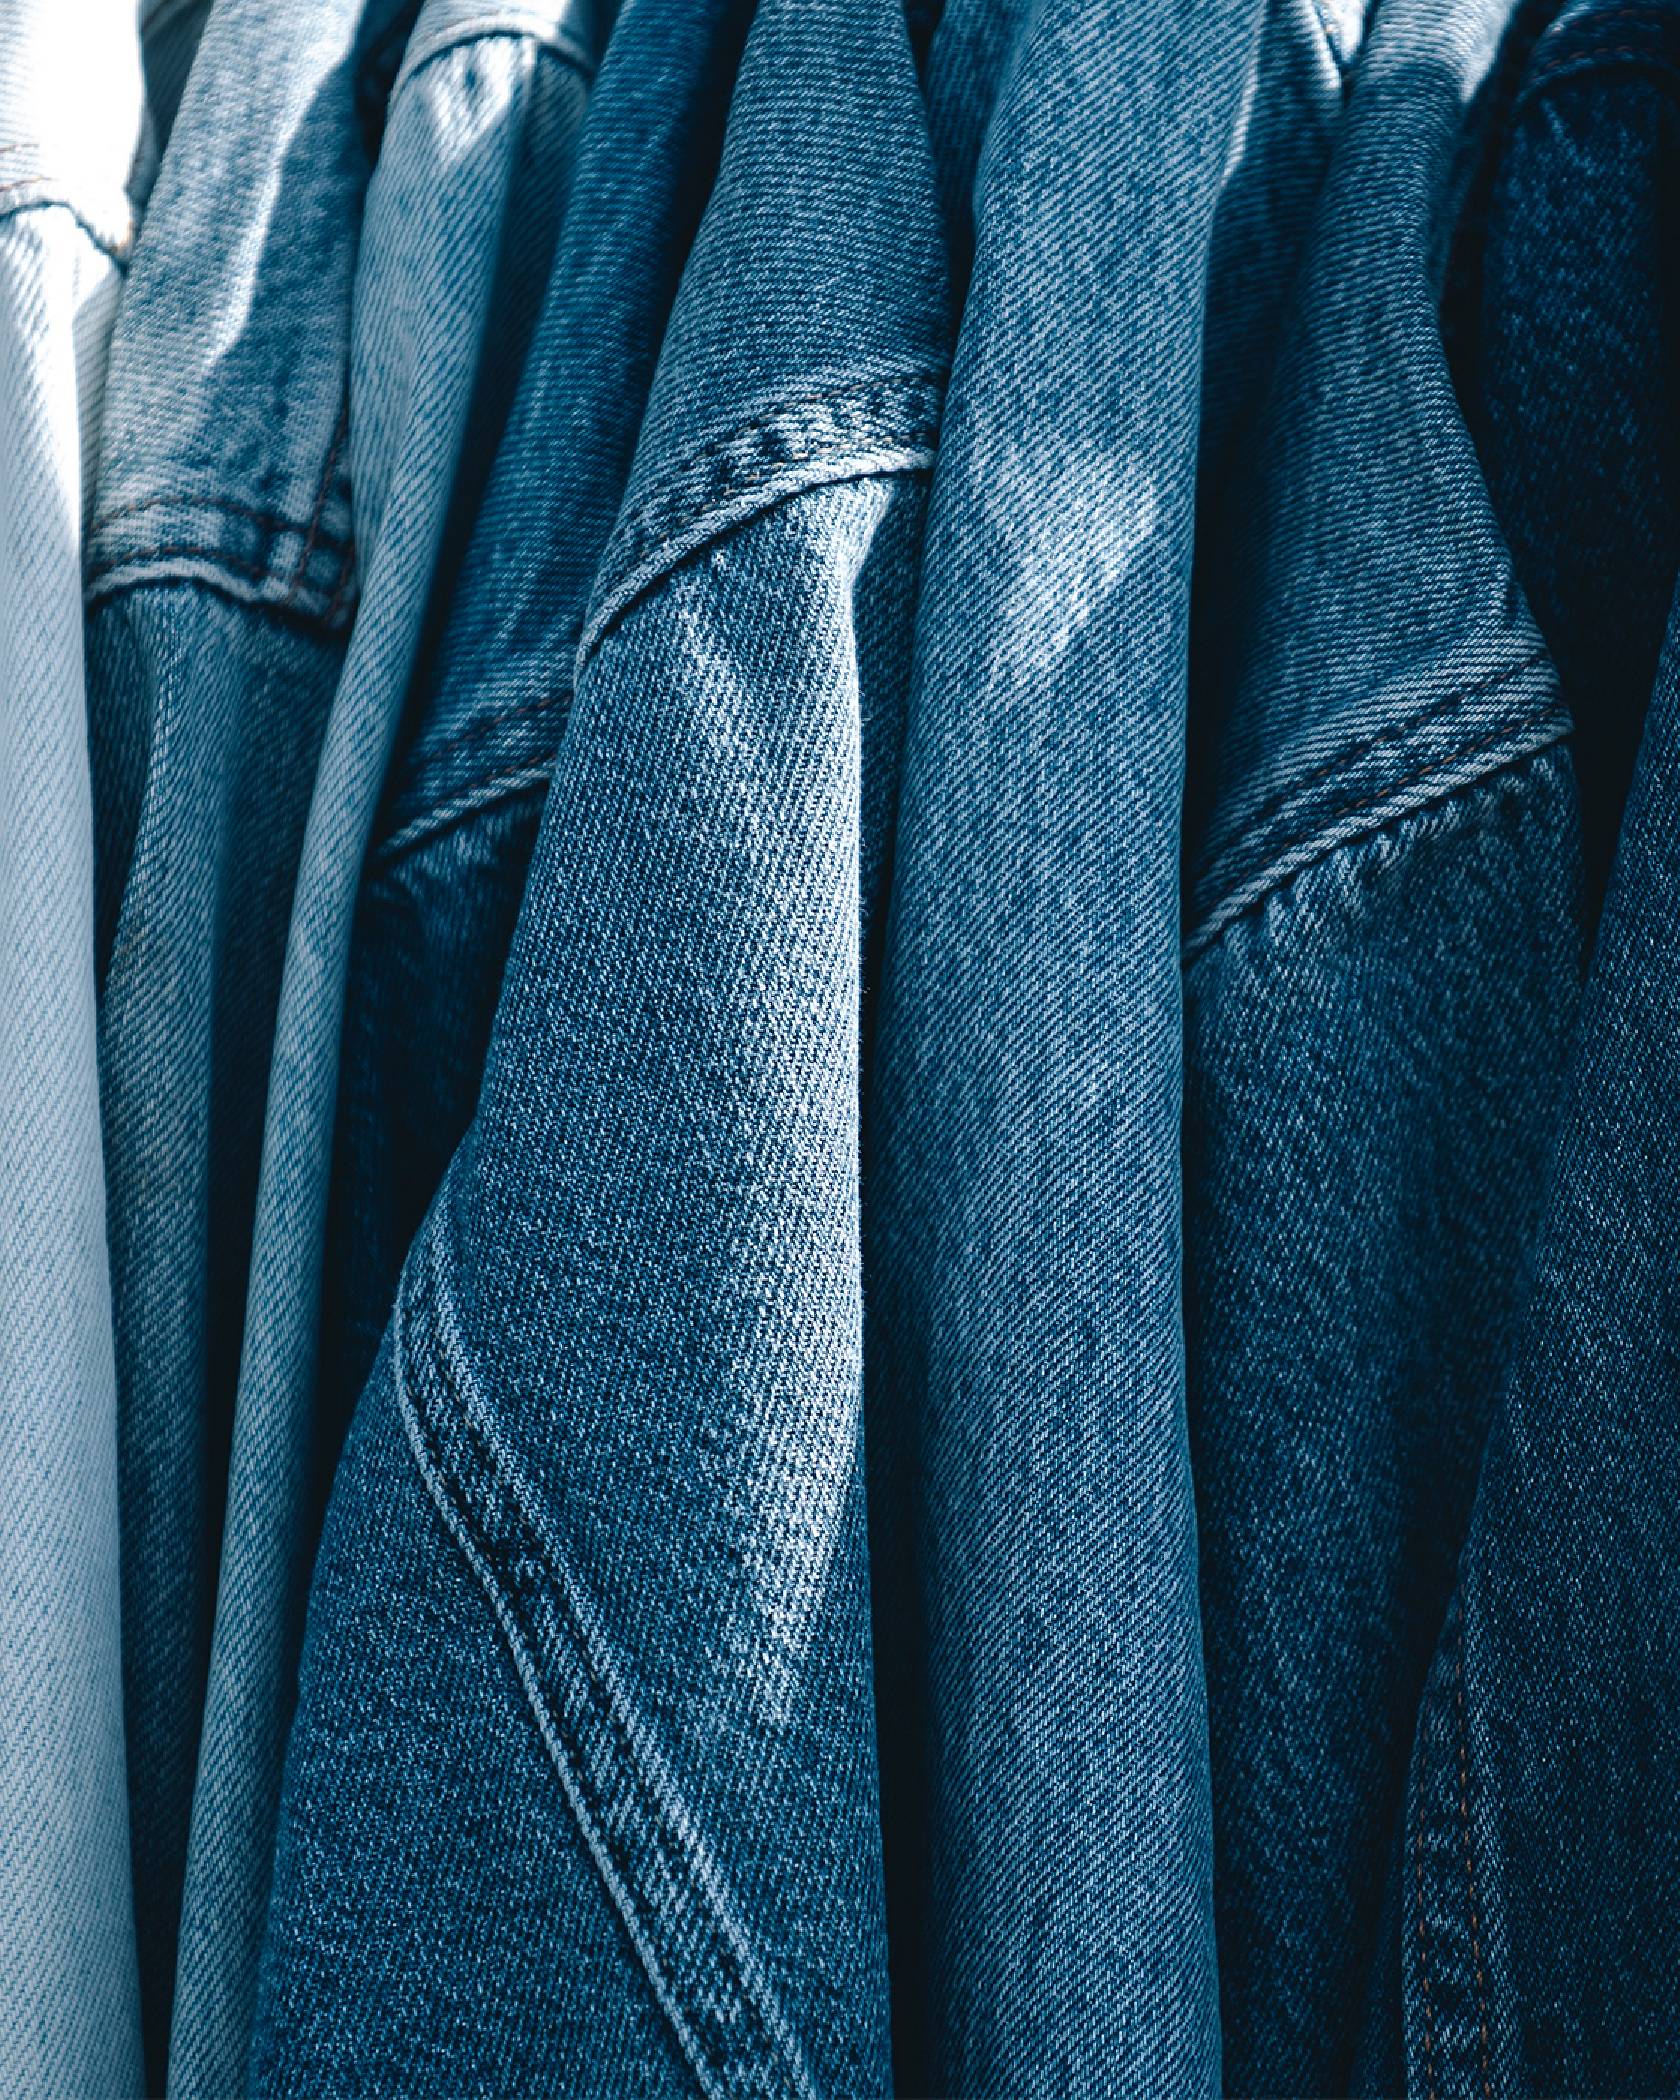 A photo of Levi's jean jackets